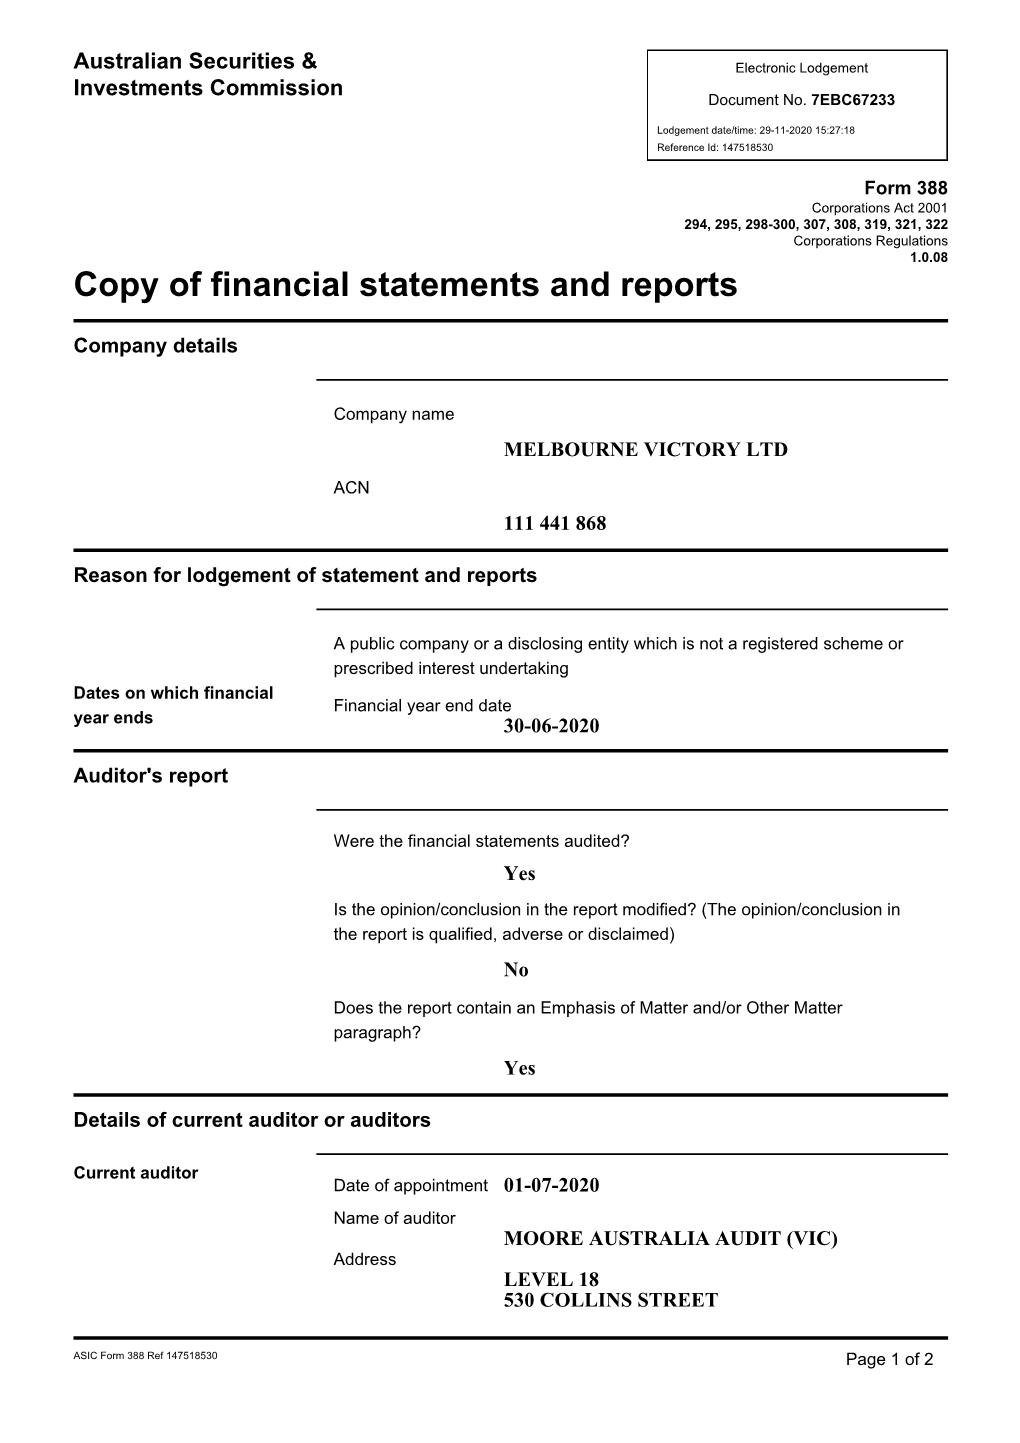 Copy of Financial Statements and Reports